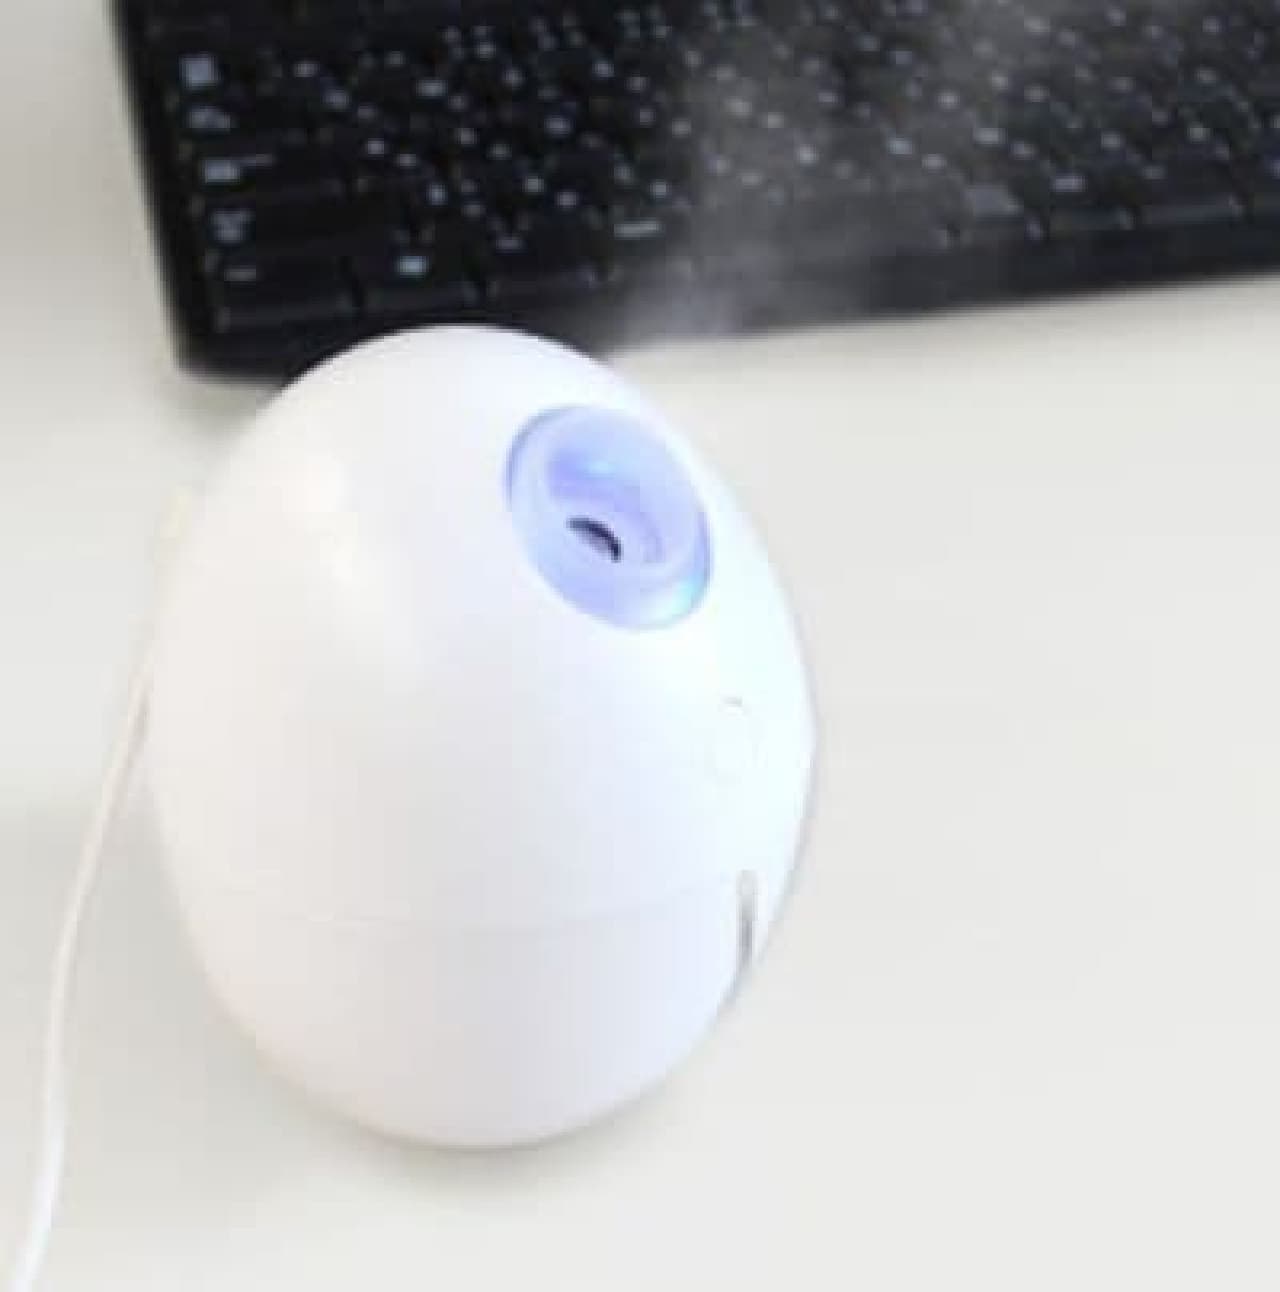 Released "Egg-shaped USB humidifier"